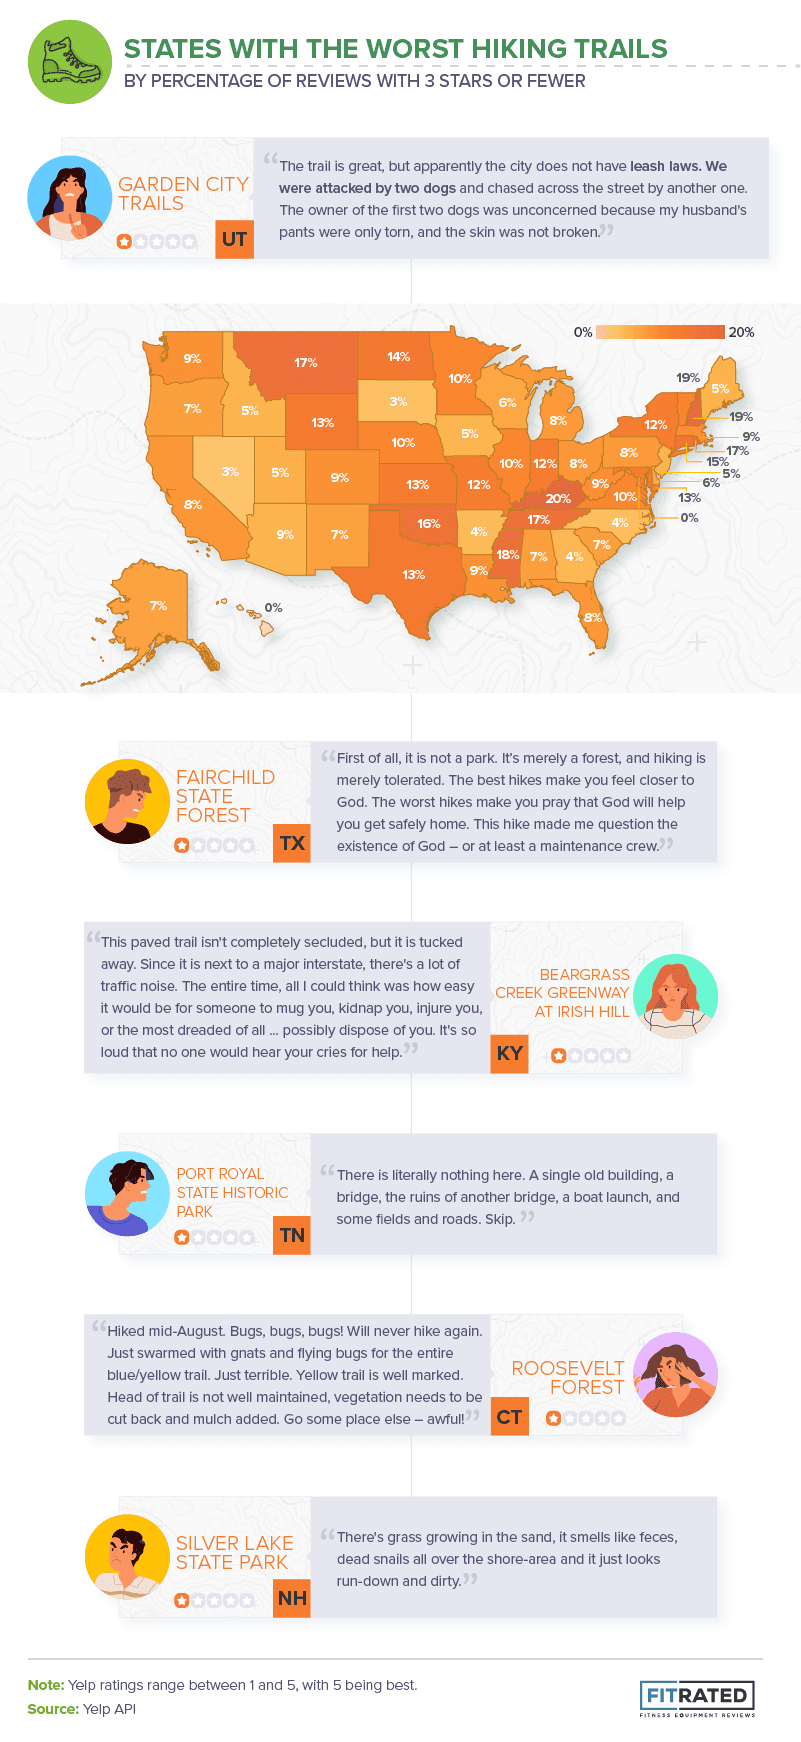 states with the worst hiking trails based on reviews with three stars or less